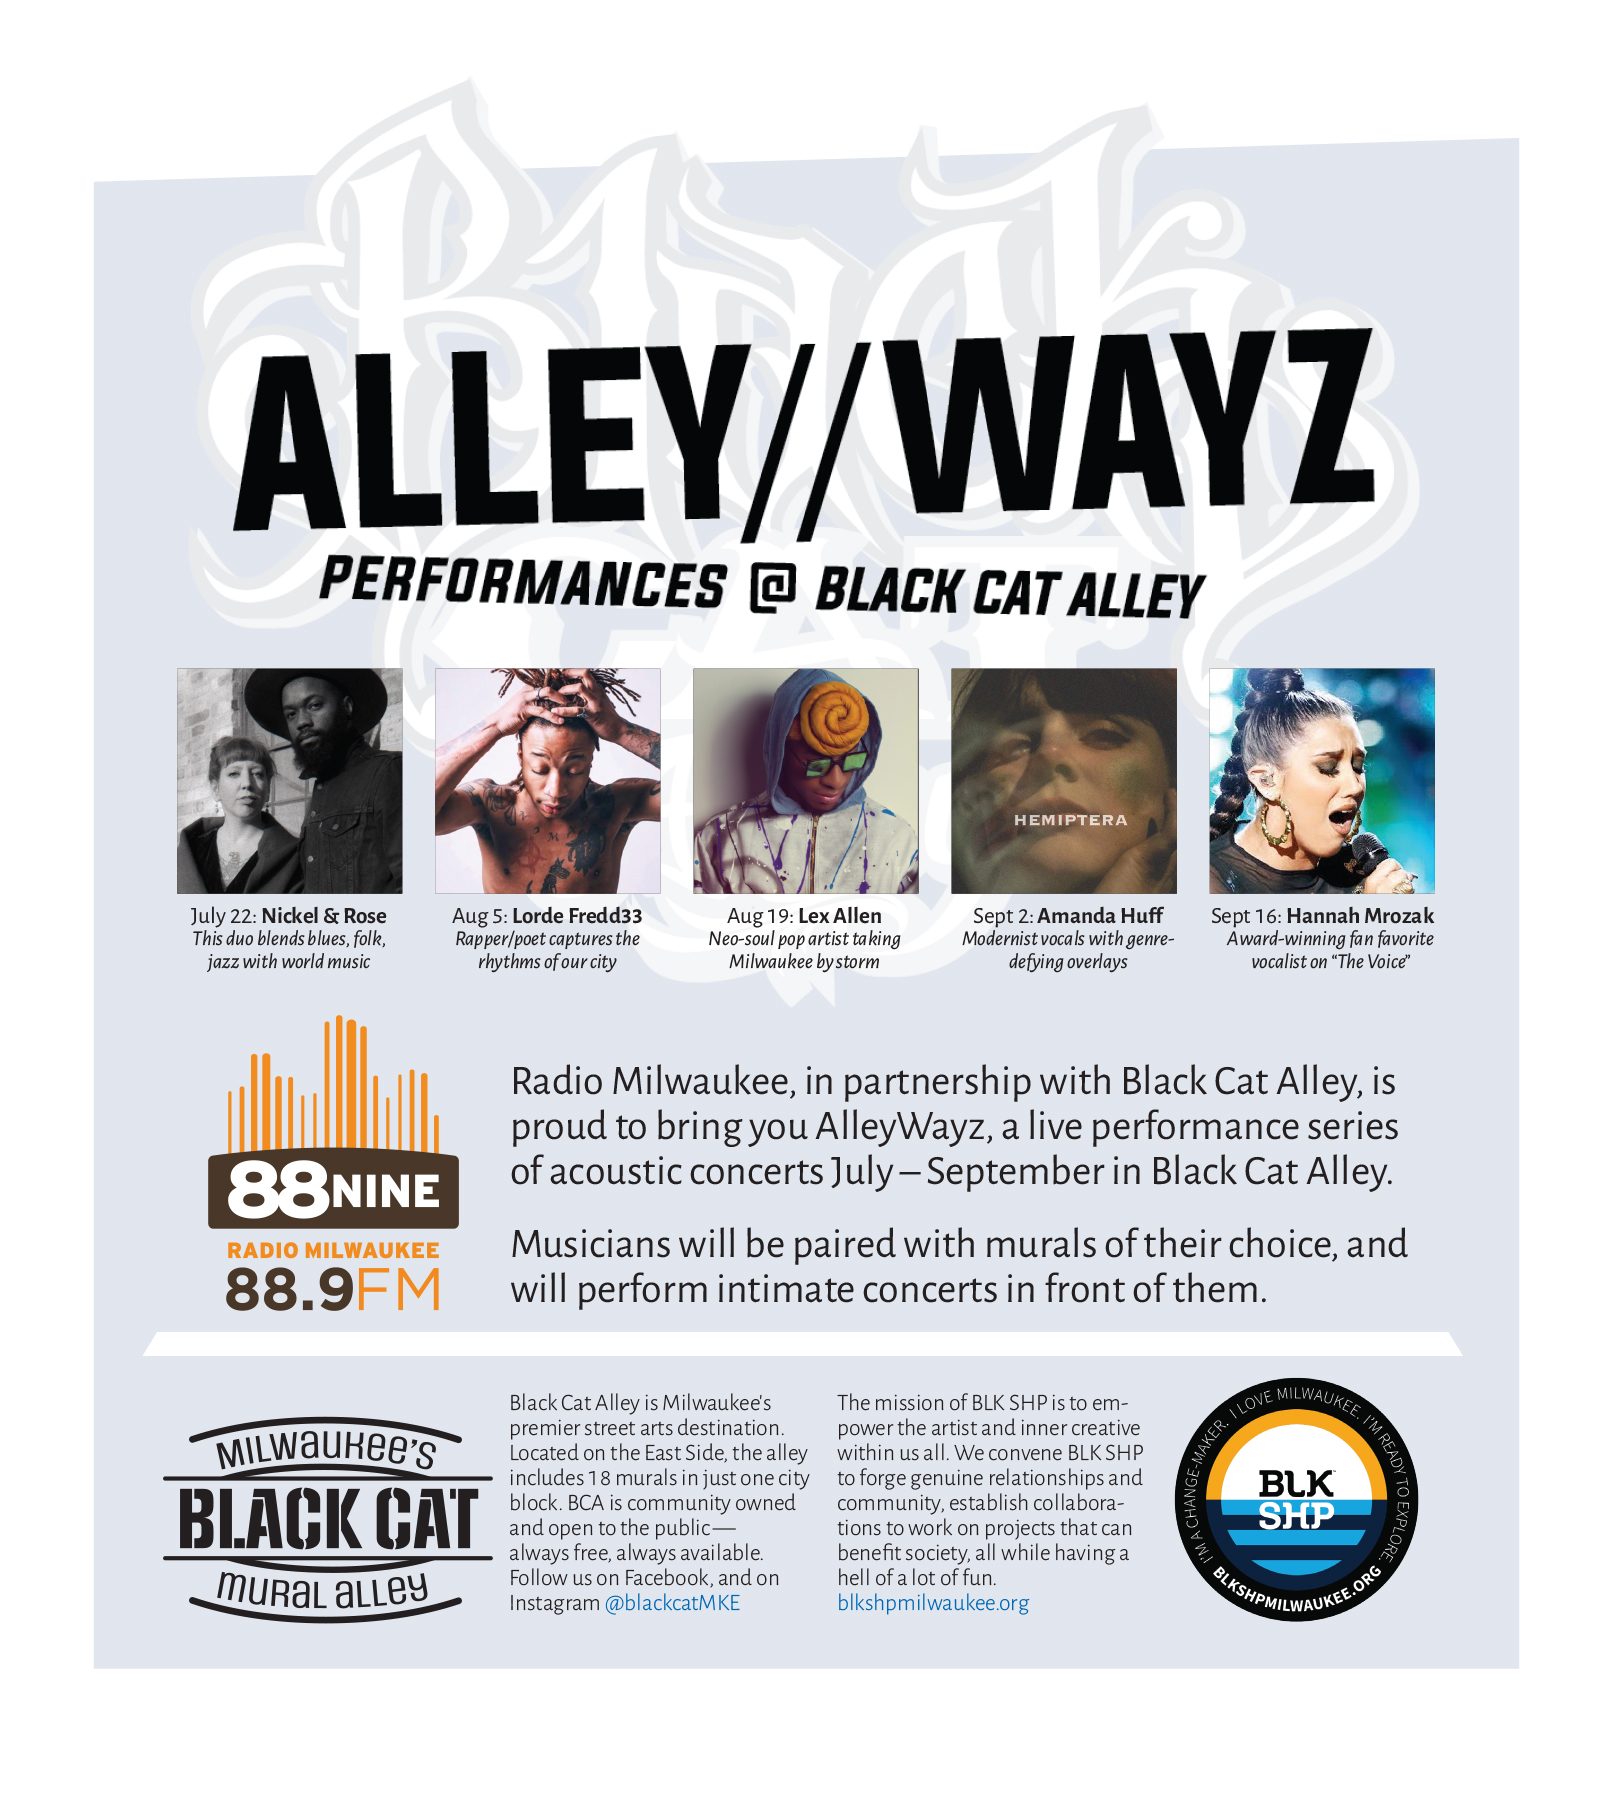 A New Music Performance Series Coming to Black Cat Alley